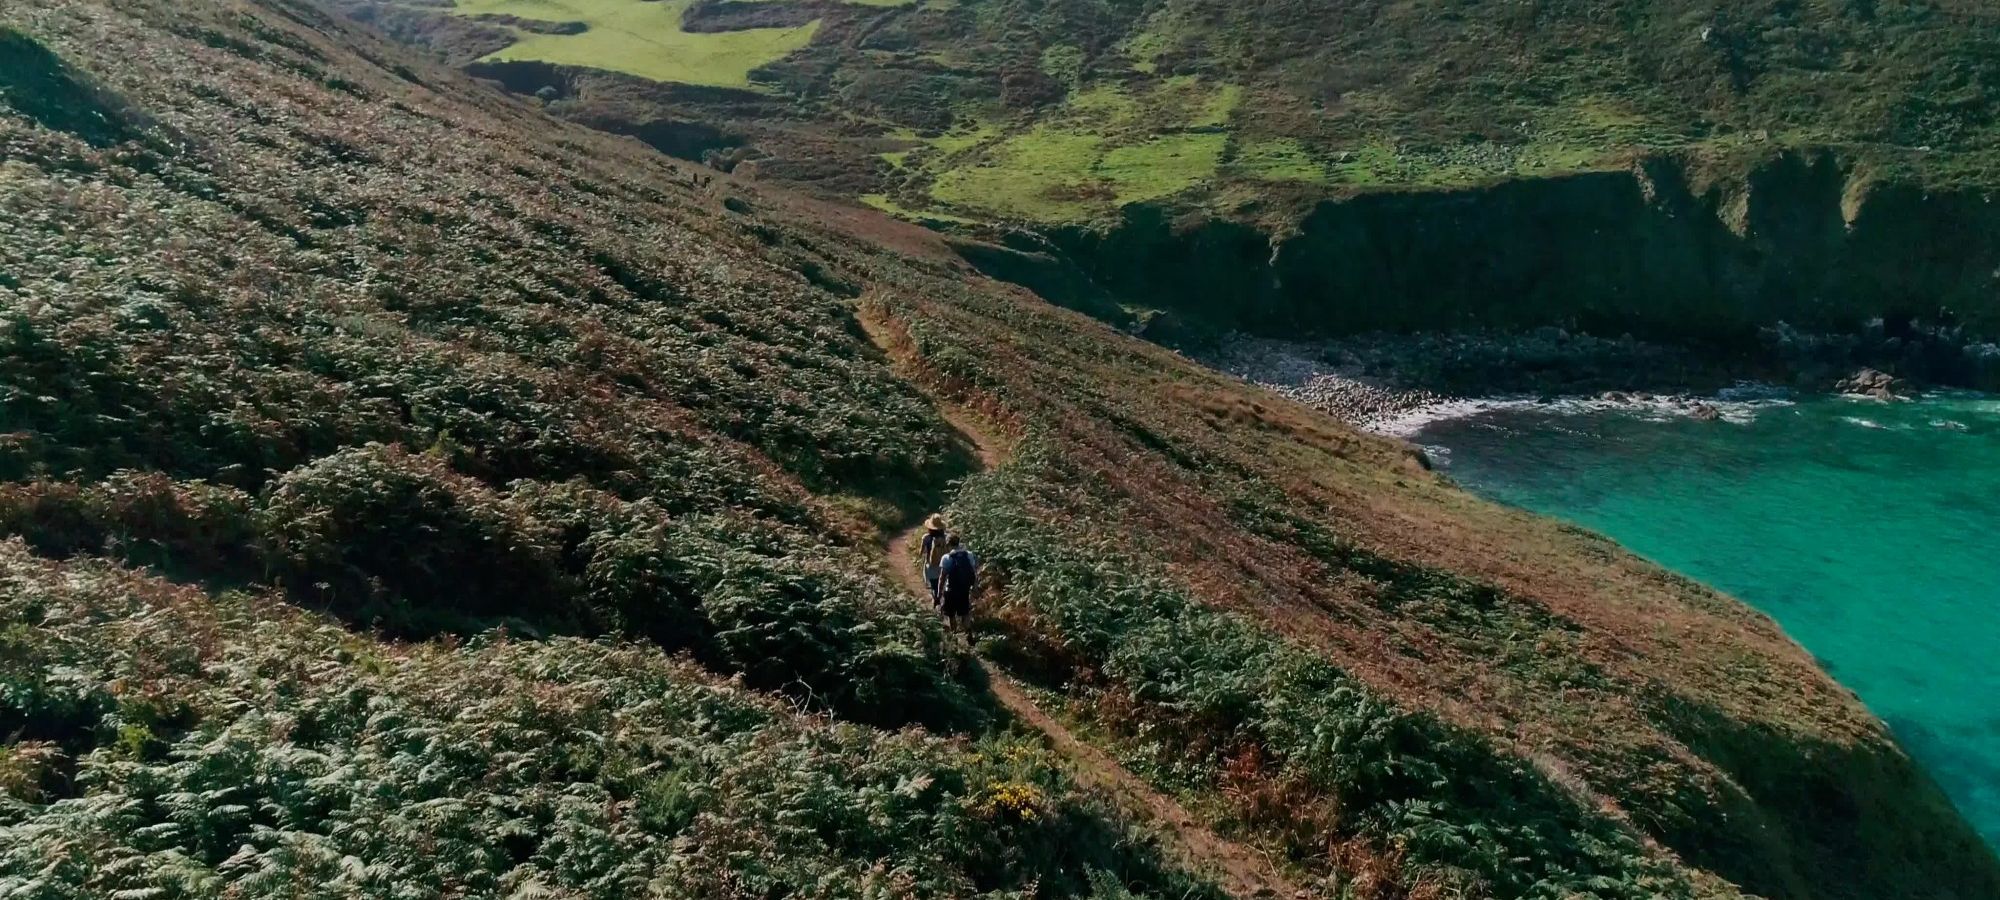 Walkers on the coast path in Cornwall